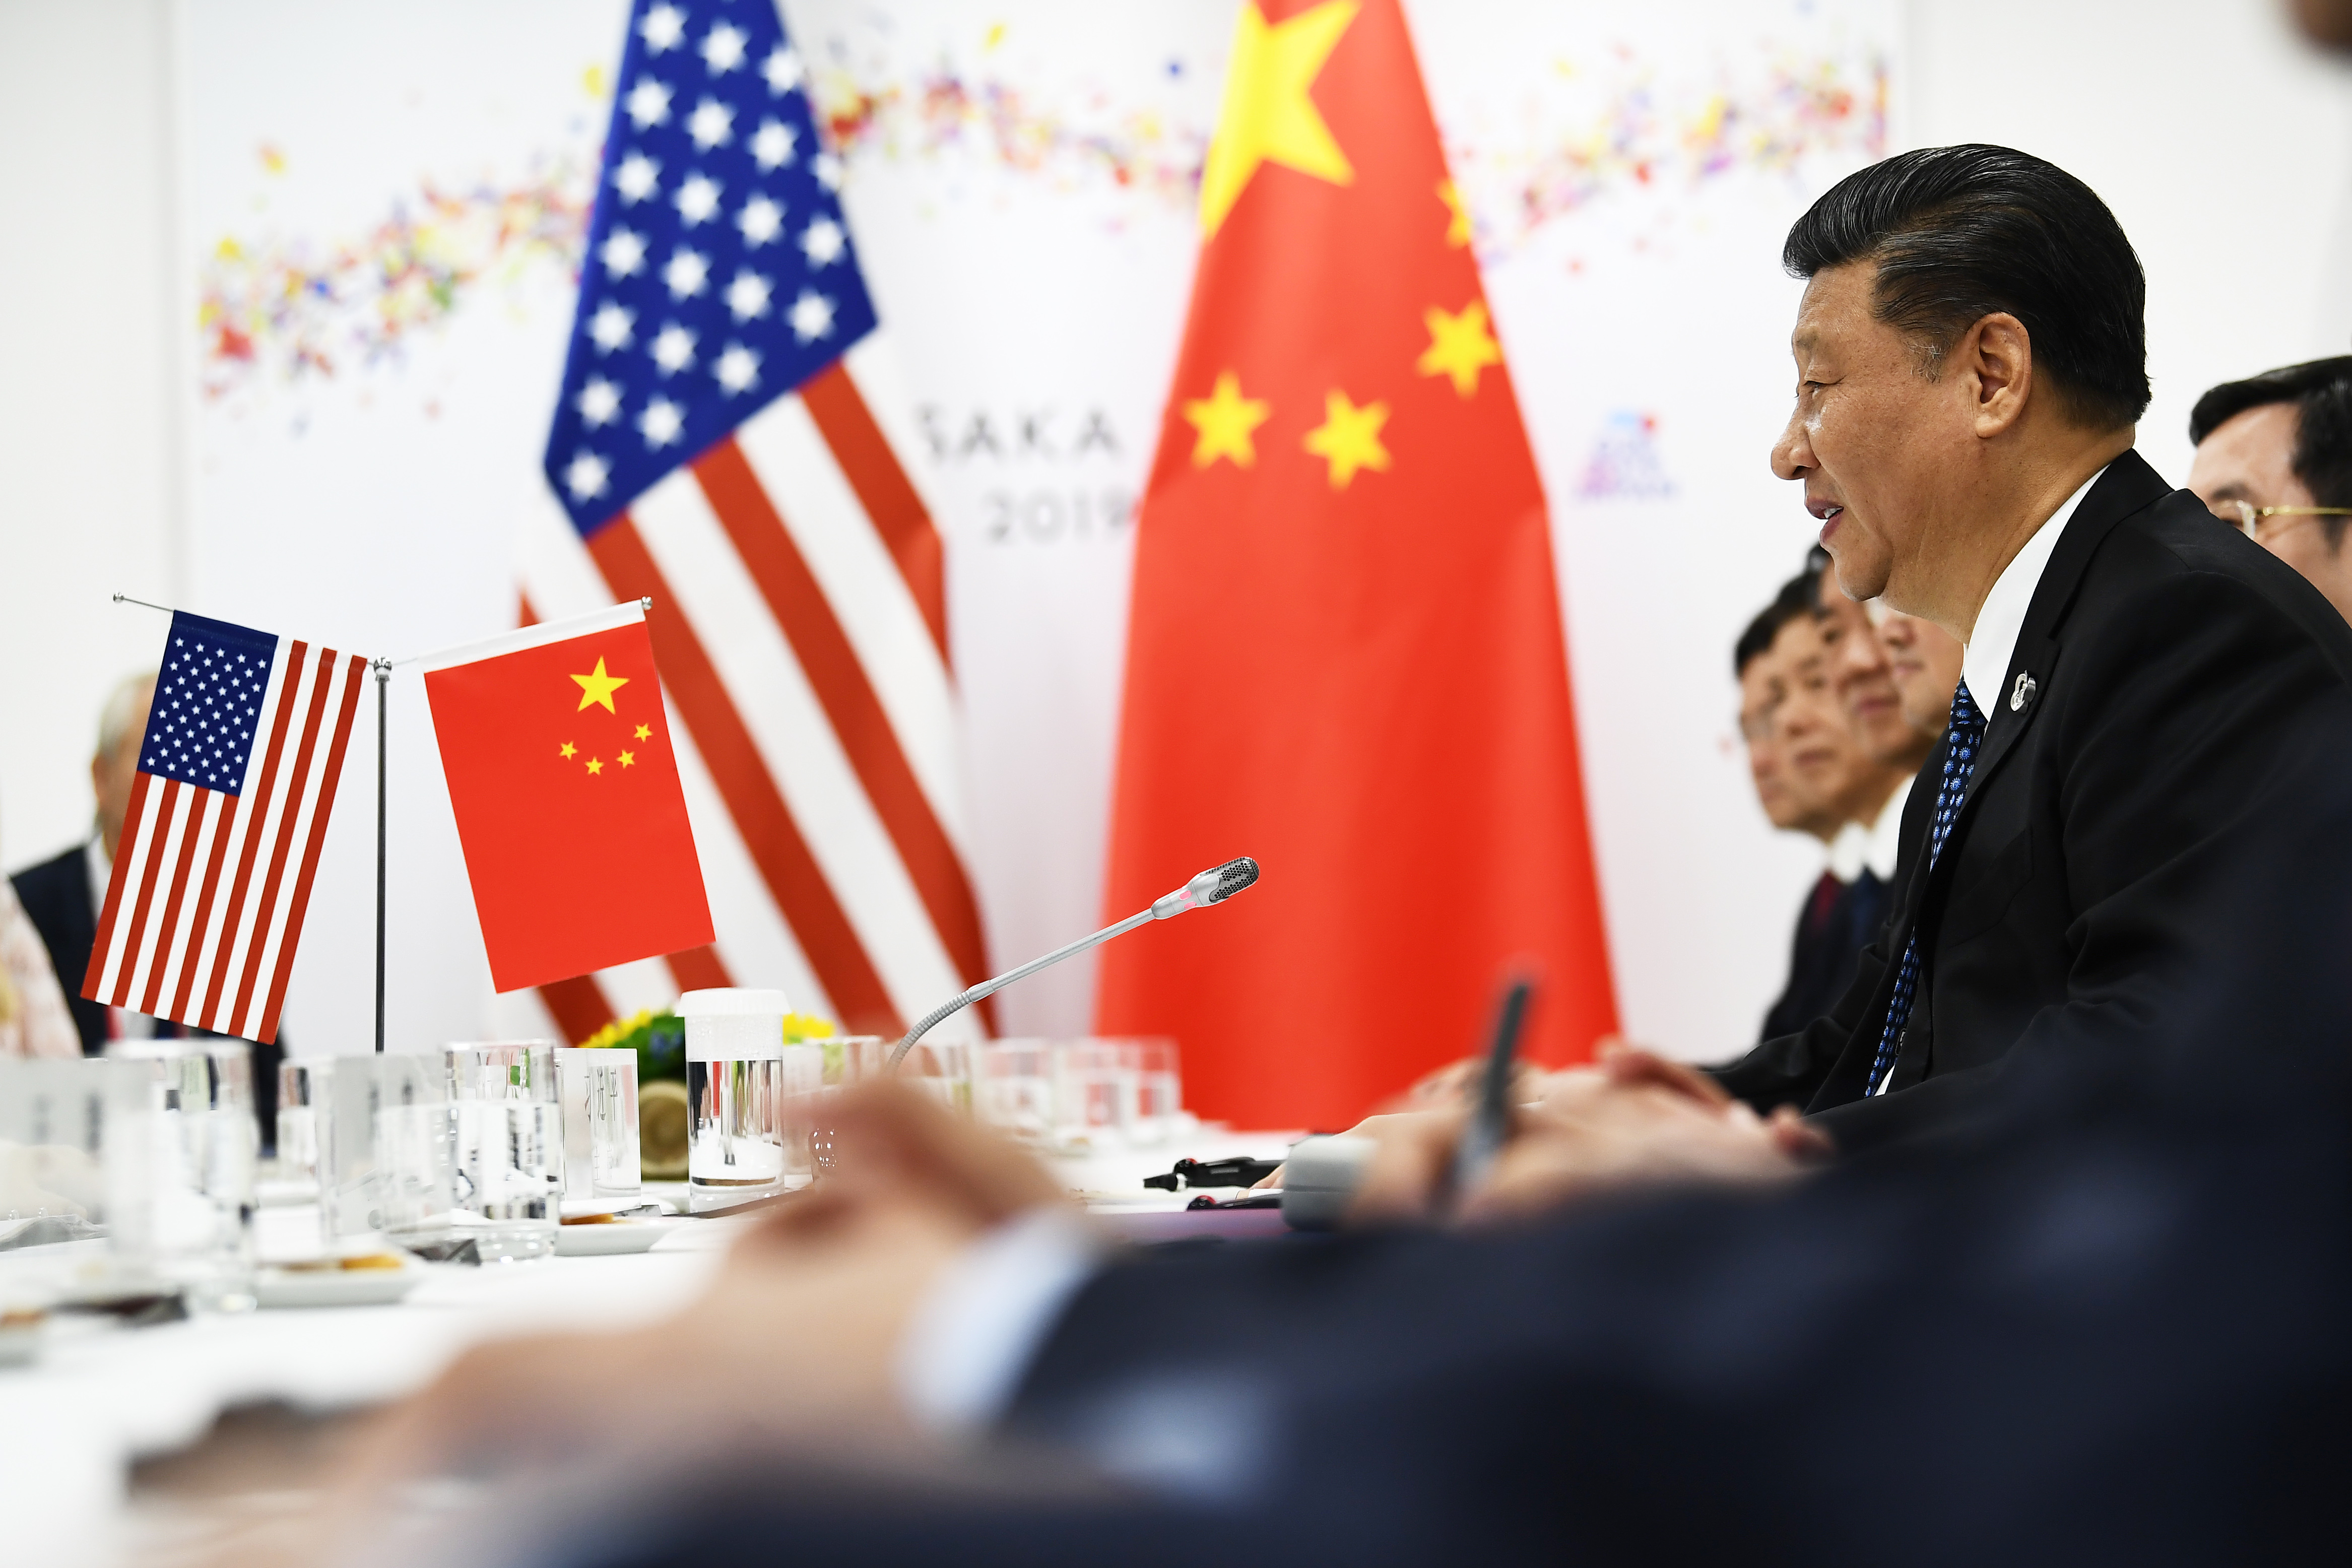 Chinese President Xi Jinping at his meeting with Donald Trump on the sidelines of the G20 Summit in Osaka on June 29.